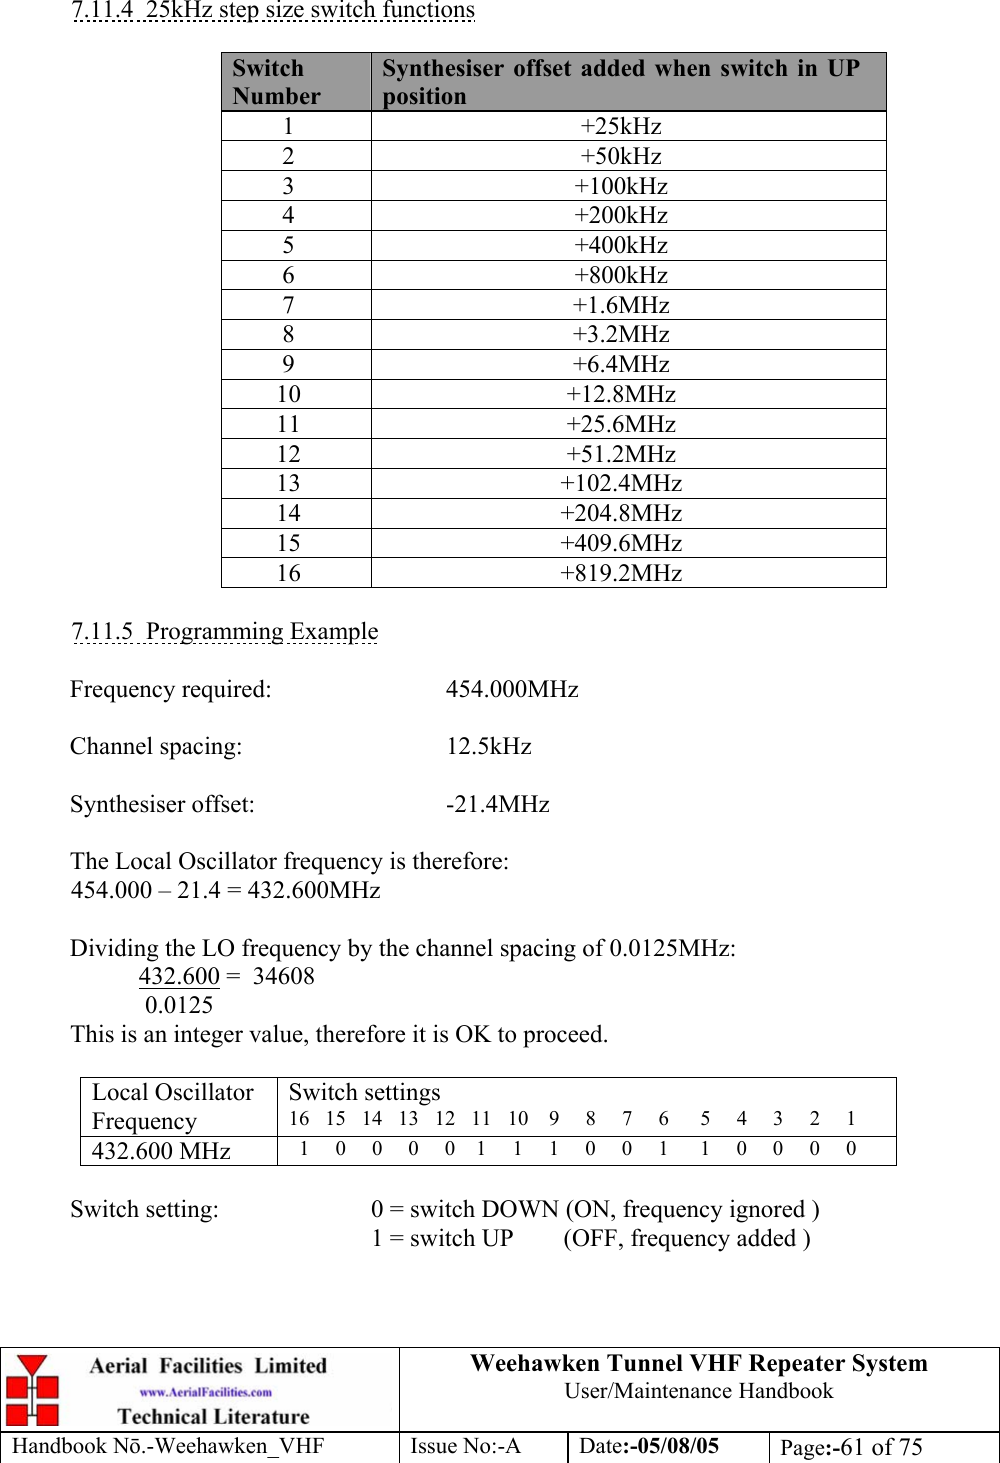  Weehawken Tunnel VHF Repeater System User/Maintenance Handbook Handbook N.-Weehawken_VHF Issue No:-A Date:-05/08/05  Page:-61 of 75    7.11.4  25kHz step size switch functions  Switch Number Synthesiser offset added when switch in UP position 1 +25kHz 2 +50kHz 3 +100kHz 4 +200kHz 5 +400kHz 6 +800kHz 7 +1.6MHz 8 +3.2MHz 9 +6.4MHz 10 +12.8MHz 11 +25.6MHz 12 +51.2MHz 13 +102.4MHz 14 +204.8MHz 15 +409.6MHz 16 +819.2MHz  7.11.5 Programming Example  Frequency required:   454.000MHz  Channel spacing:   12.5kHz  Synthesiser offset:   -21.4MHz  The Local Oscillator frequency is therefore:   454.000 – 21.4 = 432.600MHz  Dividing the LO frequency by the channel spacing of 0.0125MHz:            432.600 =  34608              0.0125 This is an integer value, therefore it is OK to proceed.  Local Oscillator  Frequency Switch settings 16   15   14   13   12   11   10    9     8     7     6      5     4     3     2     1 432.600 MHz    1     0     0     0     0    1     1     1     0     0     1      1     0     0     0     0  Switch setting:     0 = switch DOWN (ON, frequency ignored )          1 = switch UP        (OFF, frequency added )  